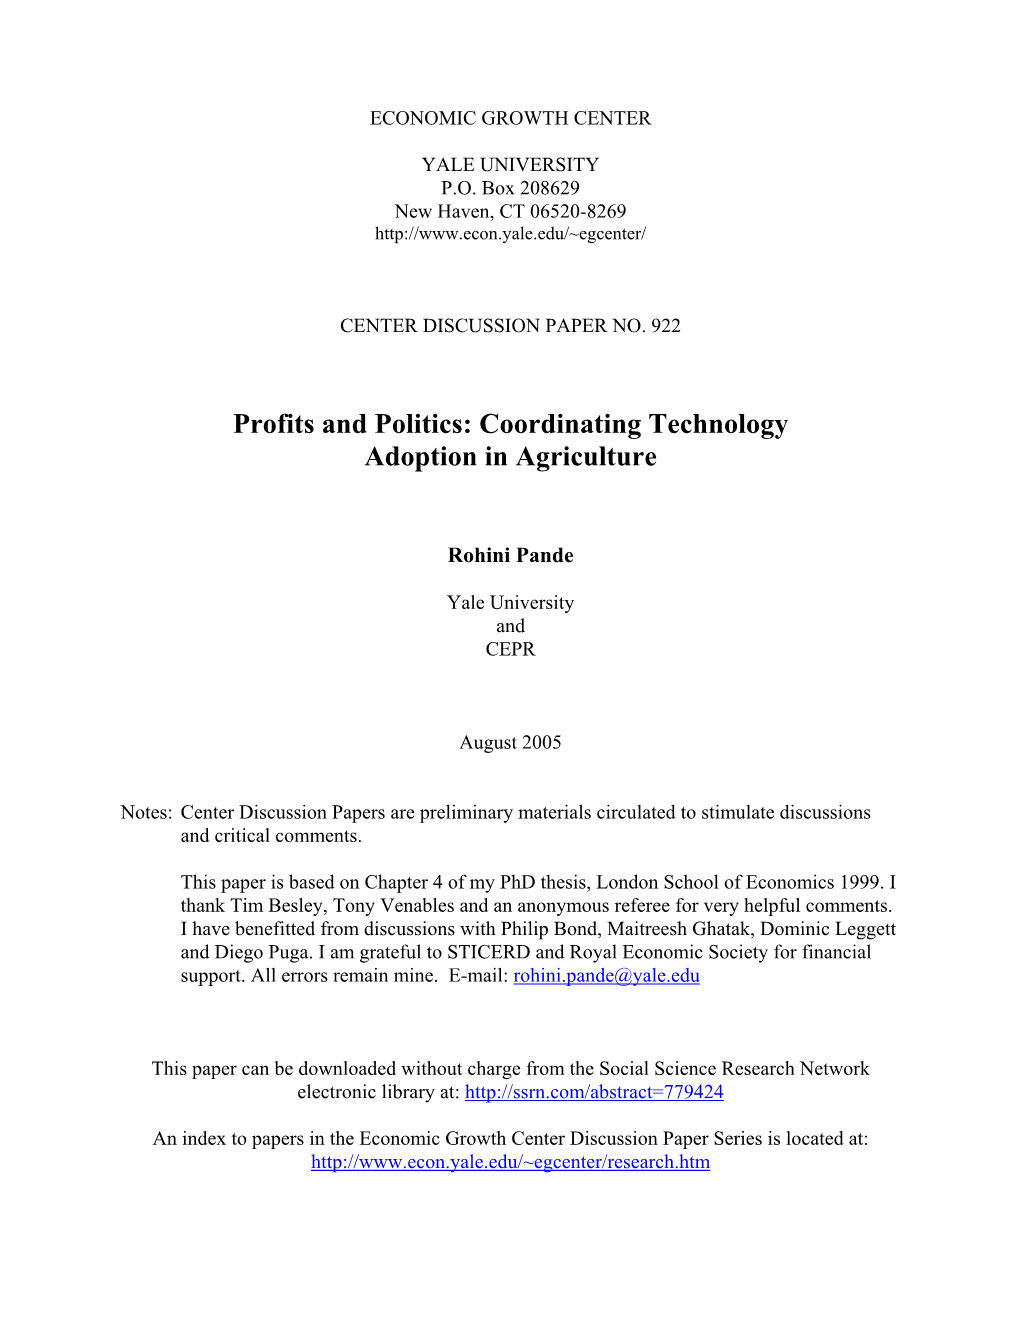 Profits and Politics: Coordinating Technology Adoption in Agriculture